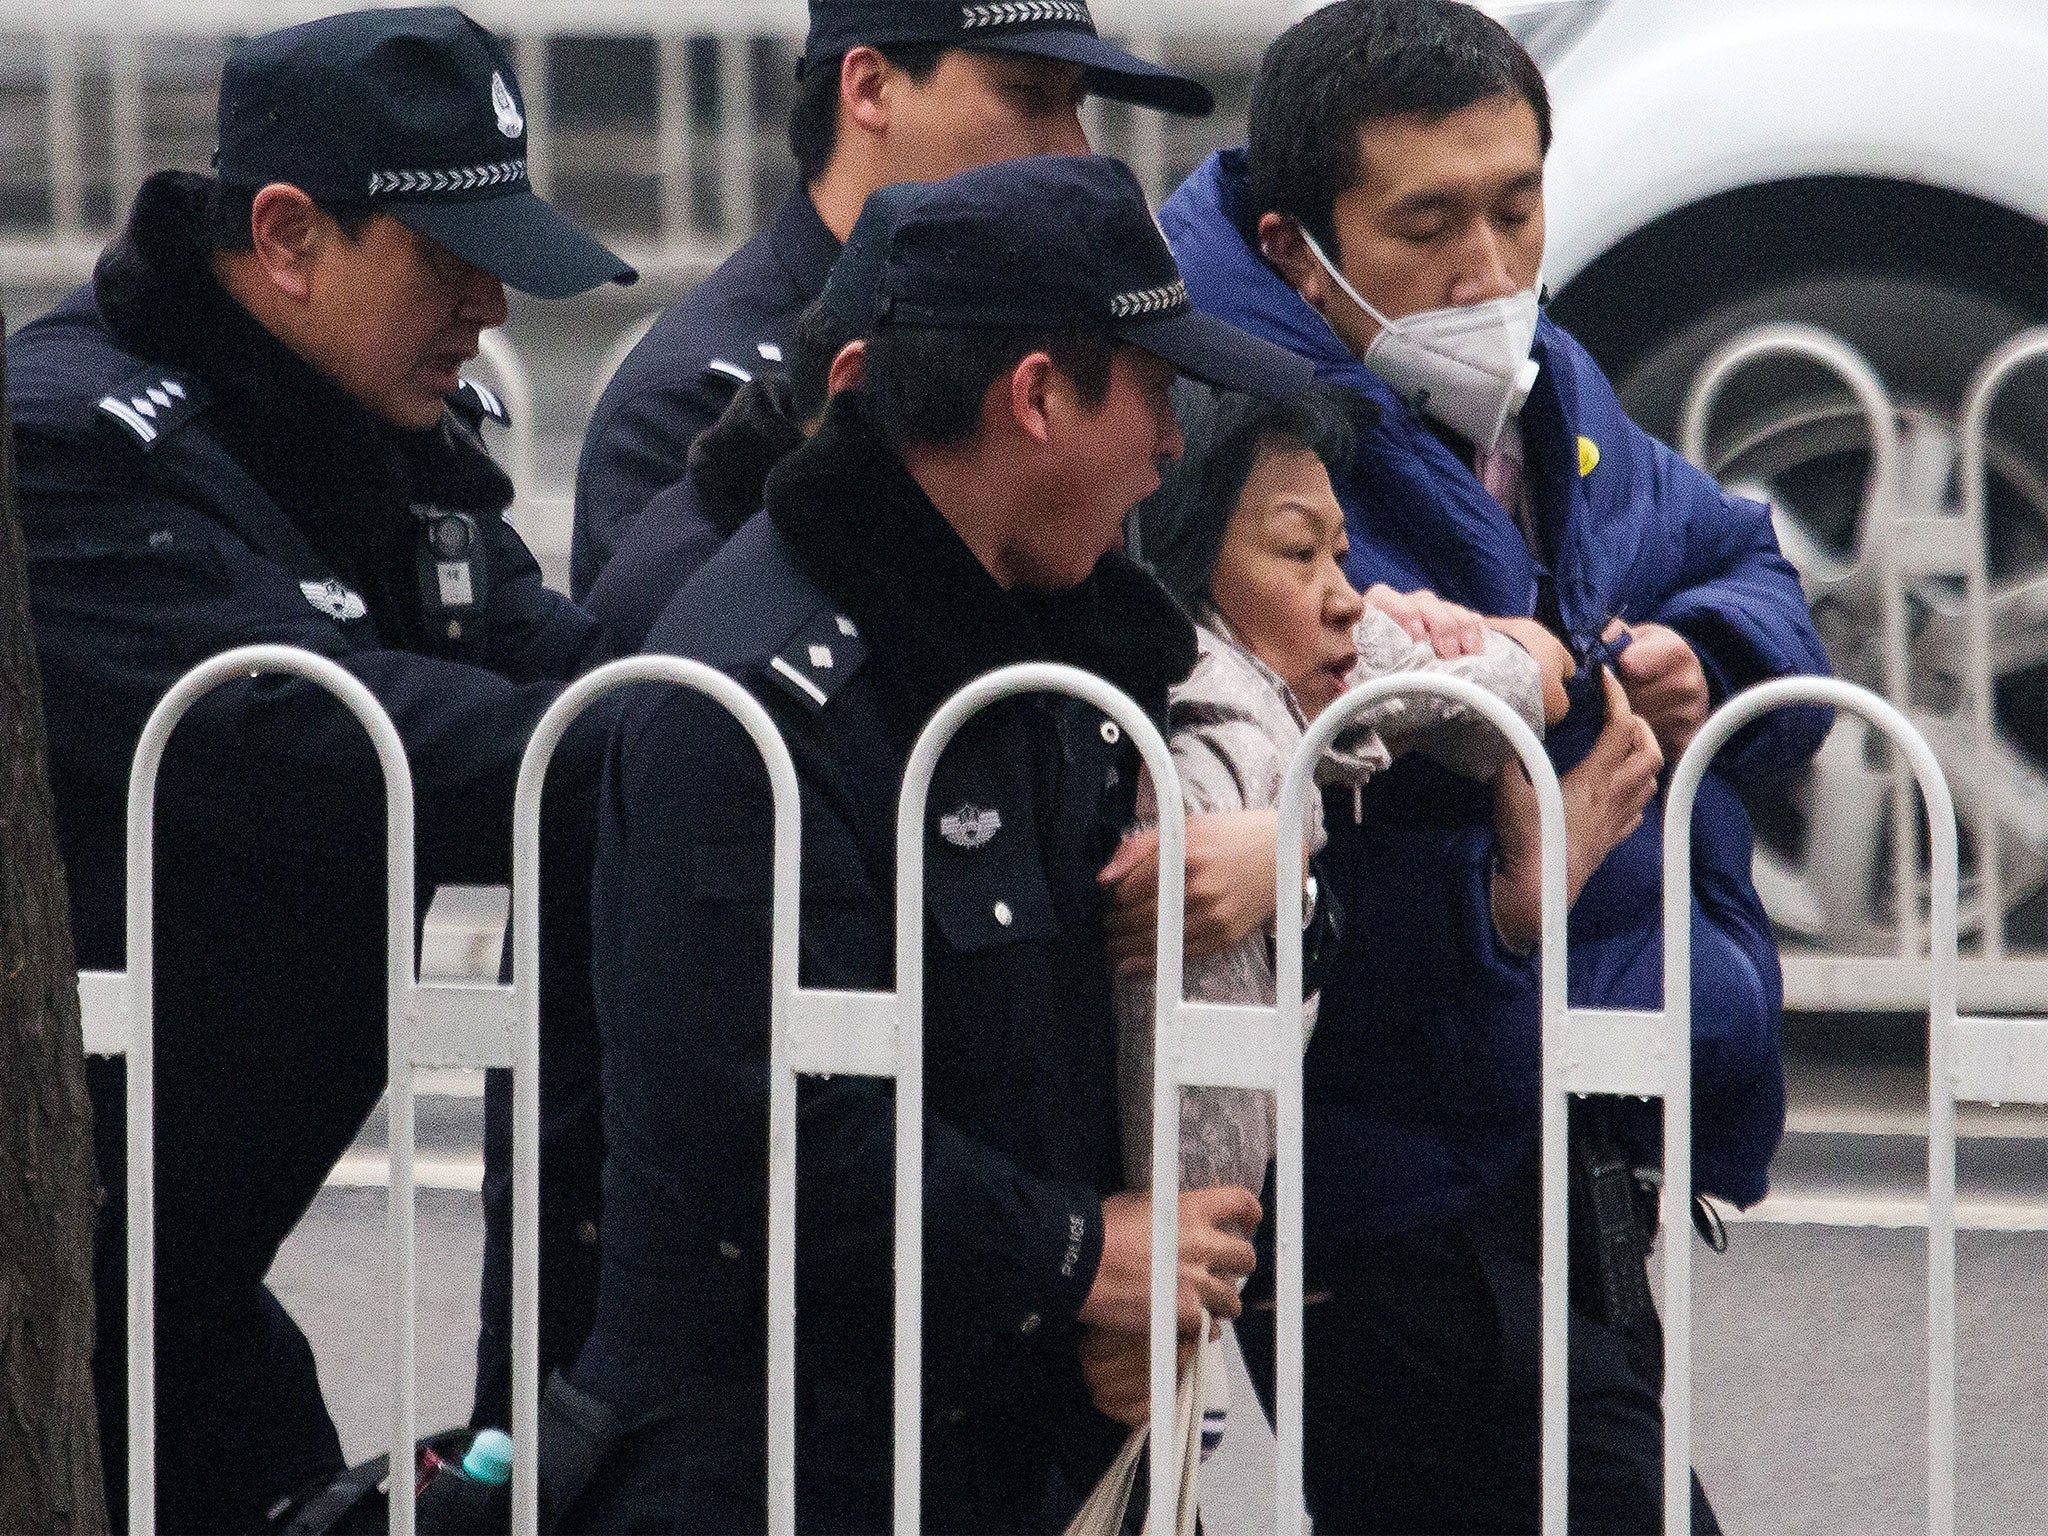 Scuffles outside Beijing court as human rights lawyer Pu Zhiqiang goes on trial